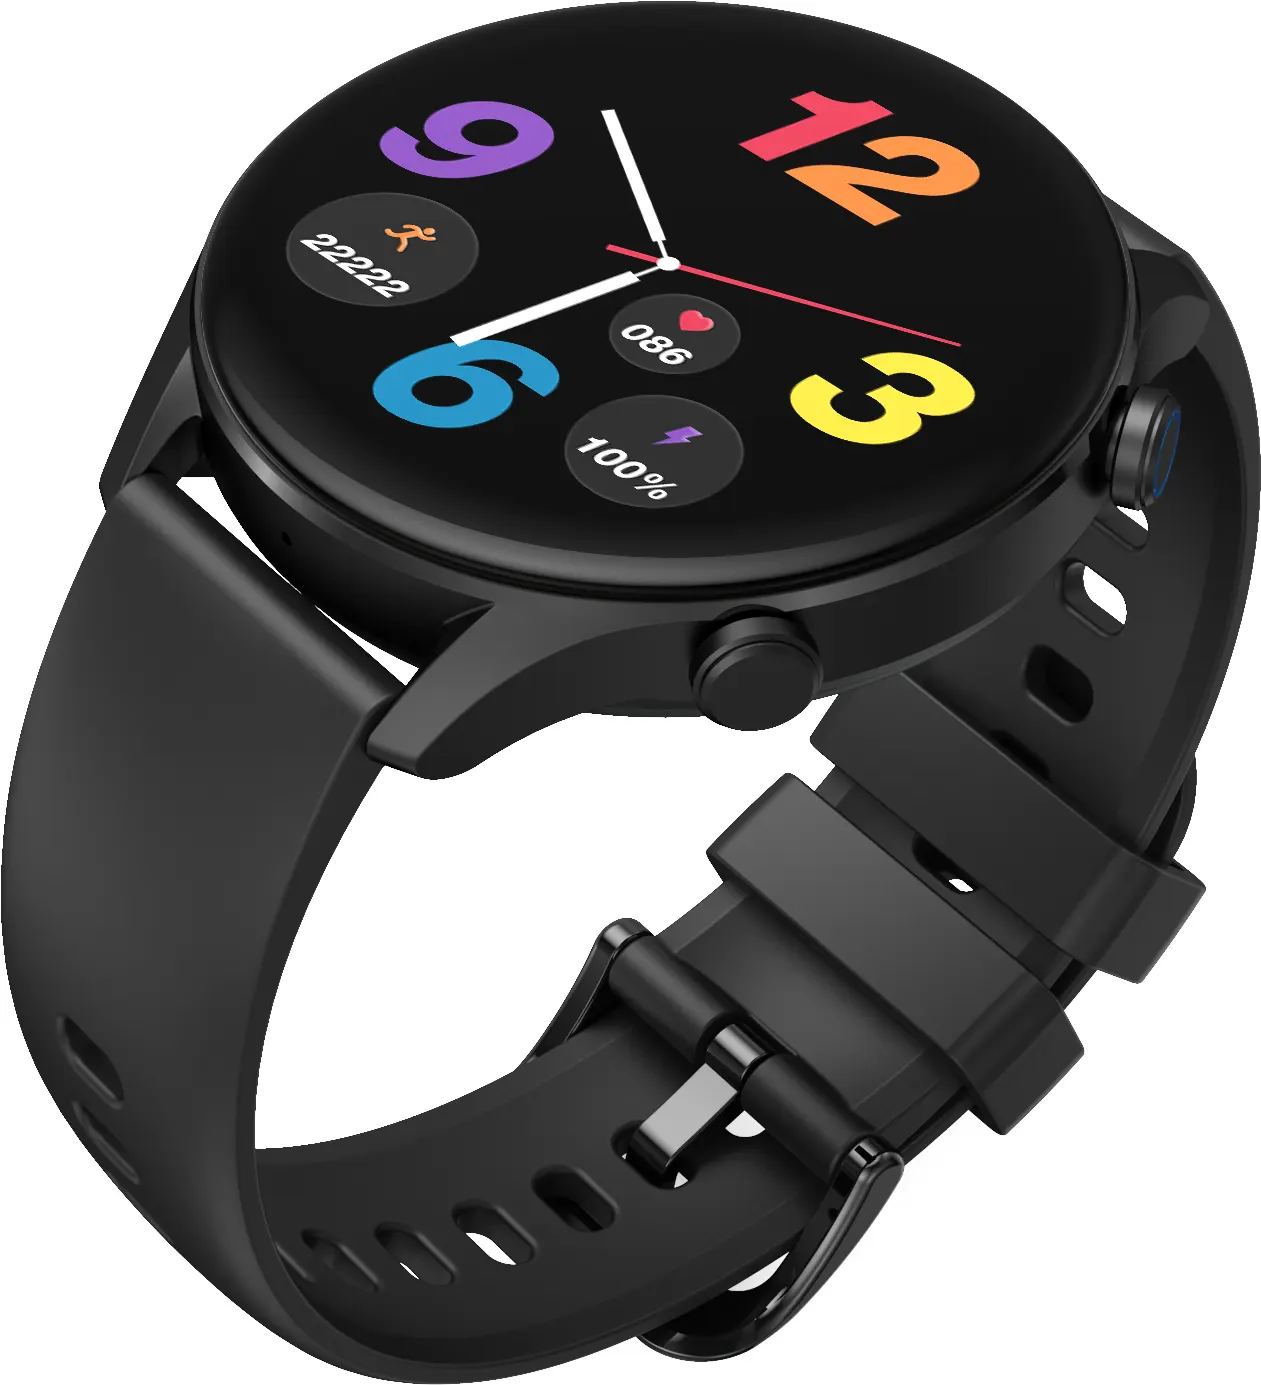 G-Tab Smart Watch, 1.43 inch touch screen, water resistant, 300 mAh battery, black, GT7